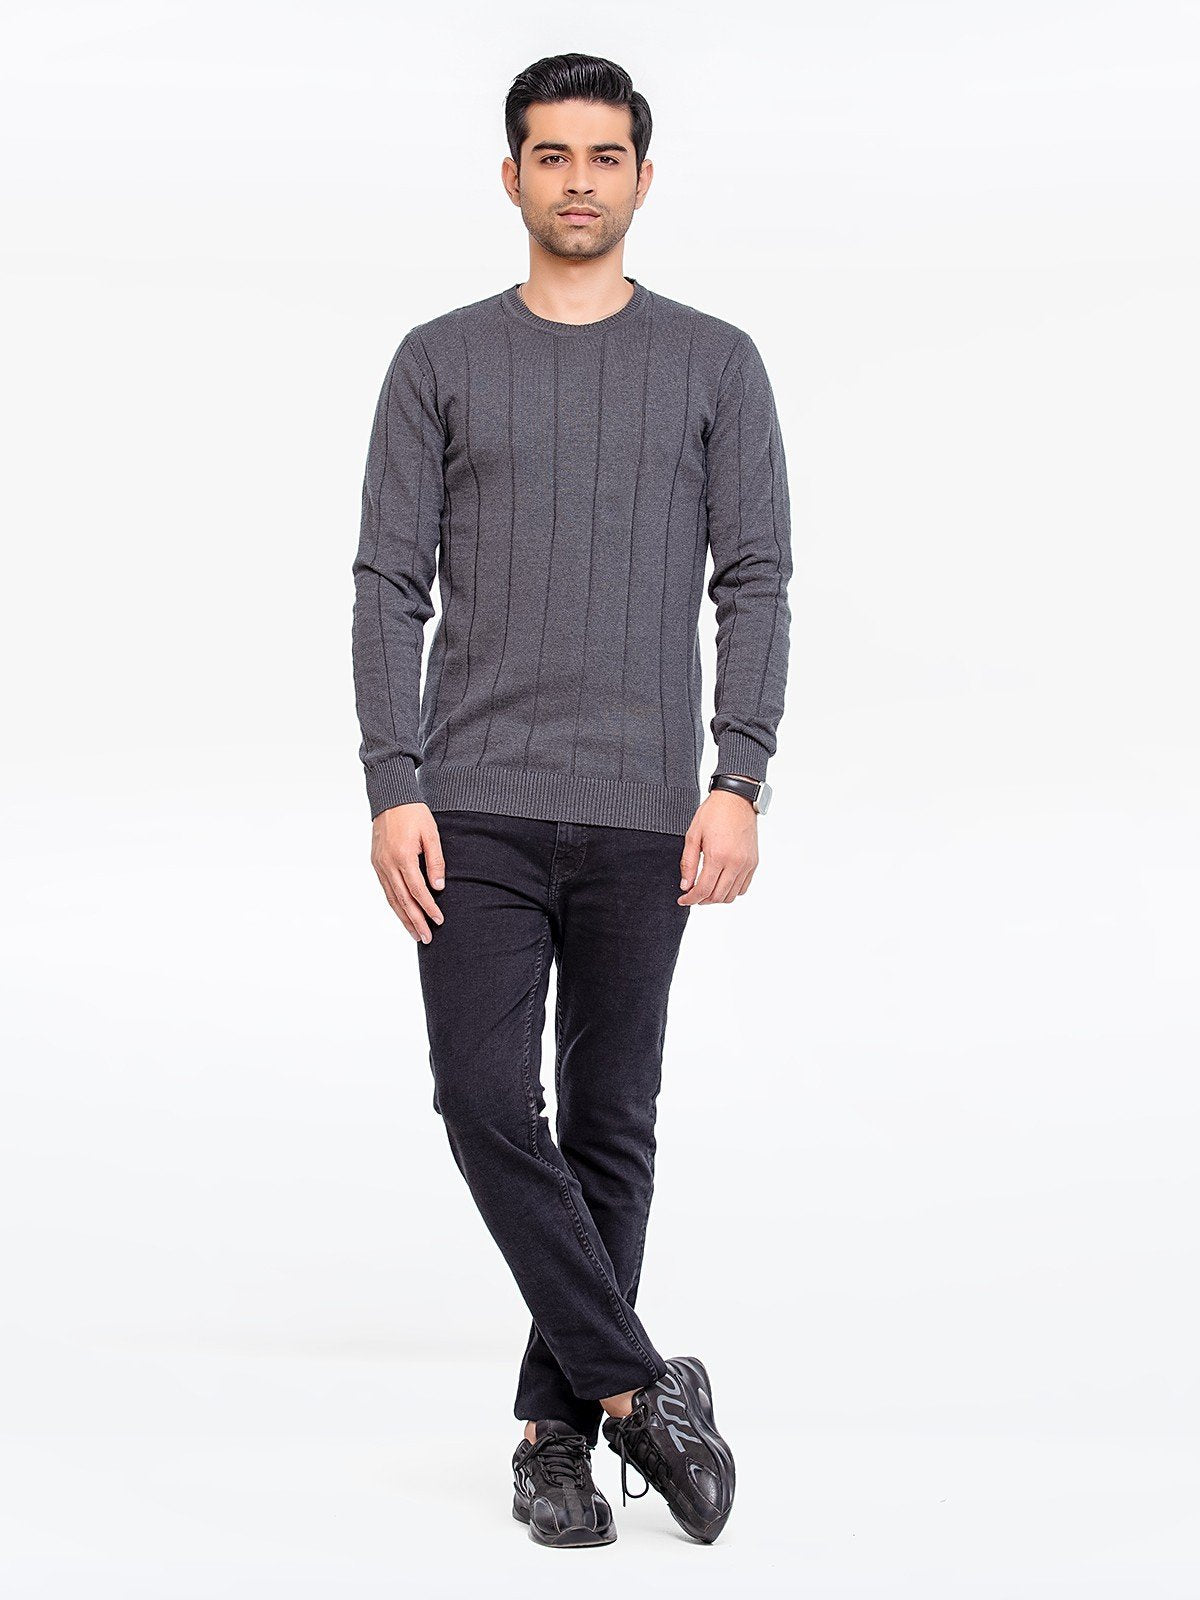 Men's Charcoal Sweater - EMTSWT23-005